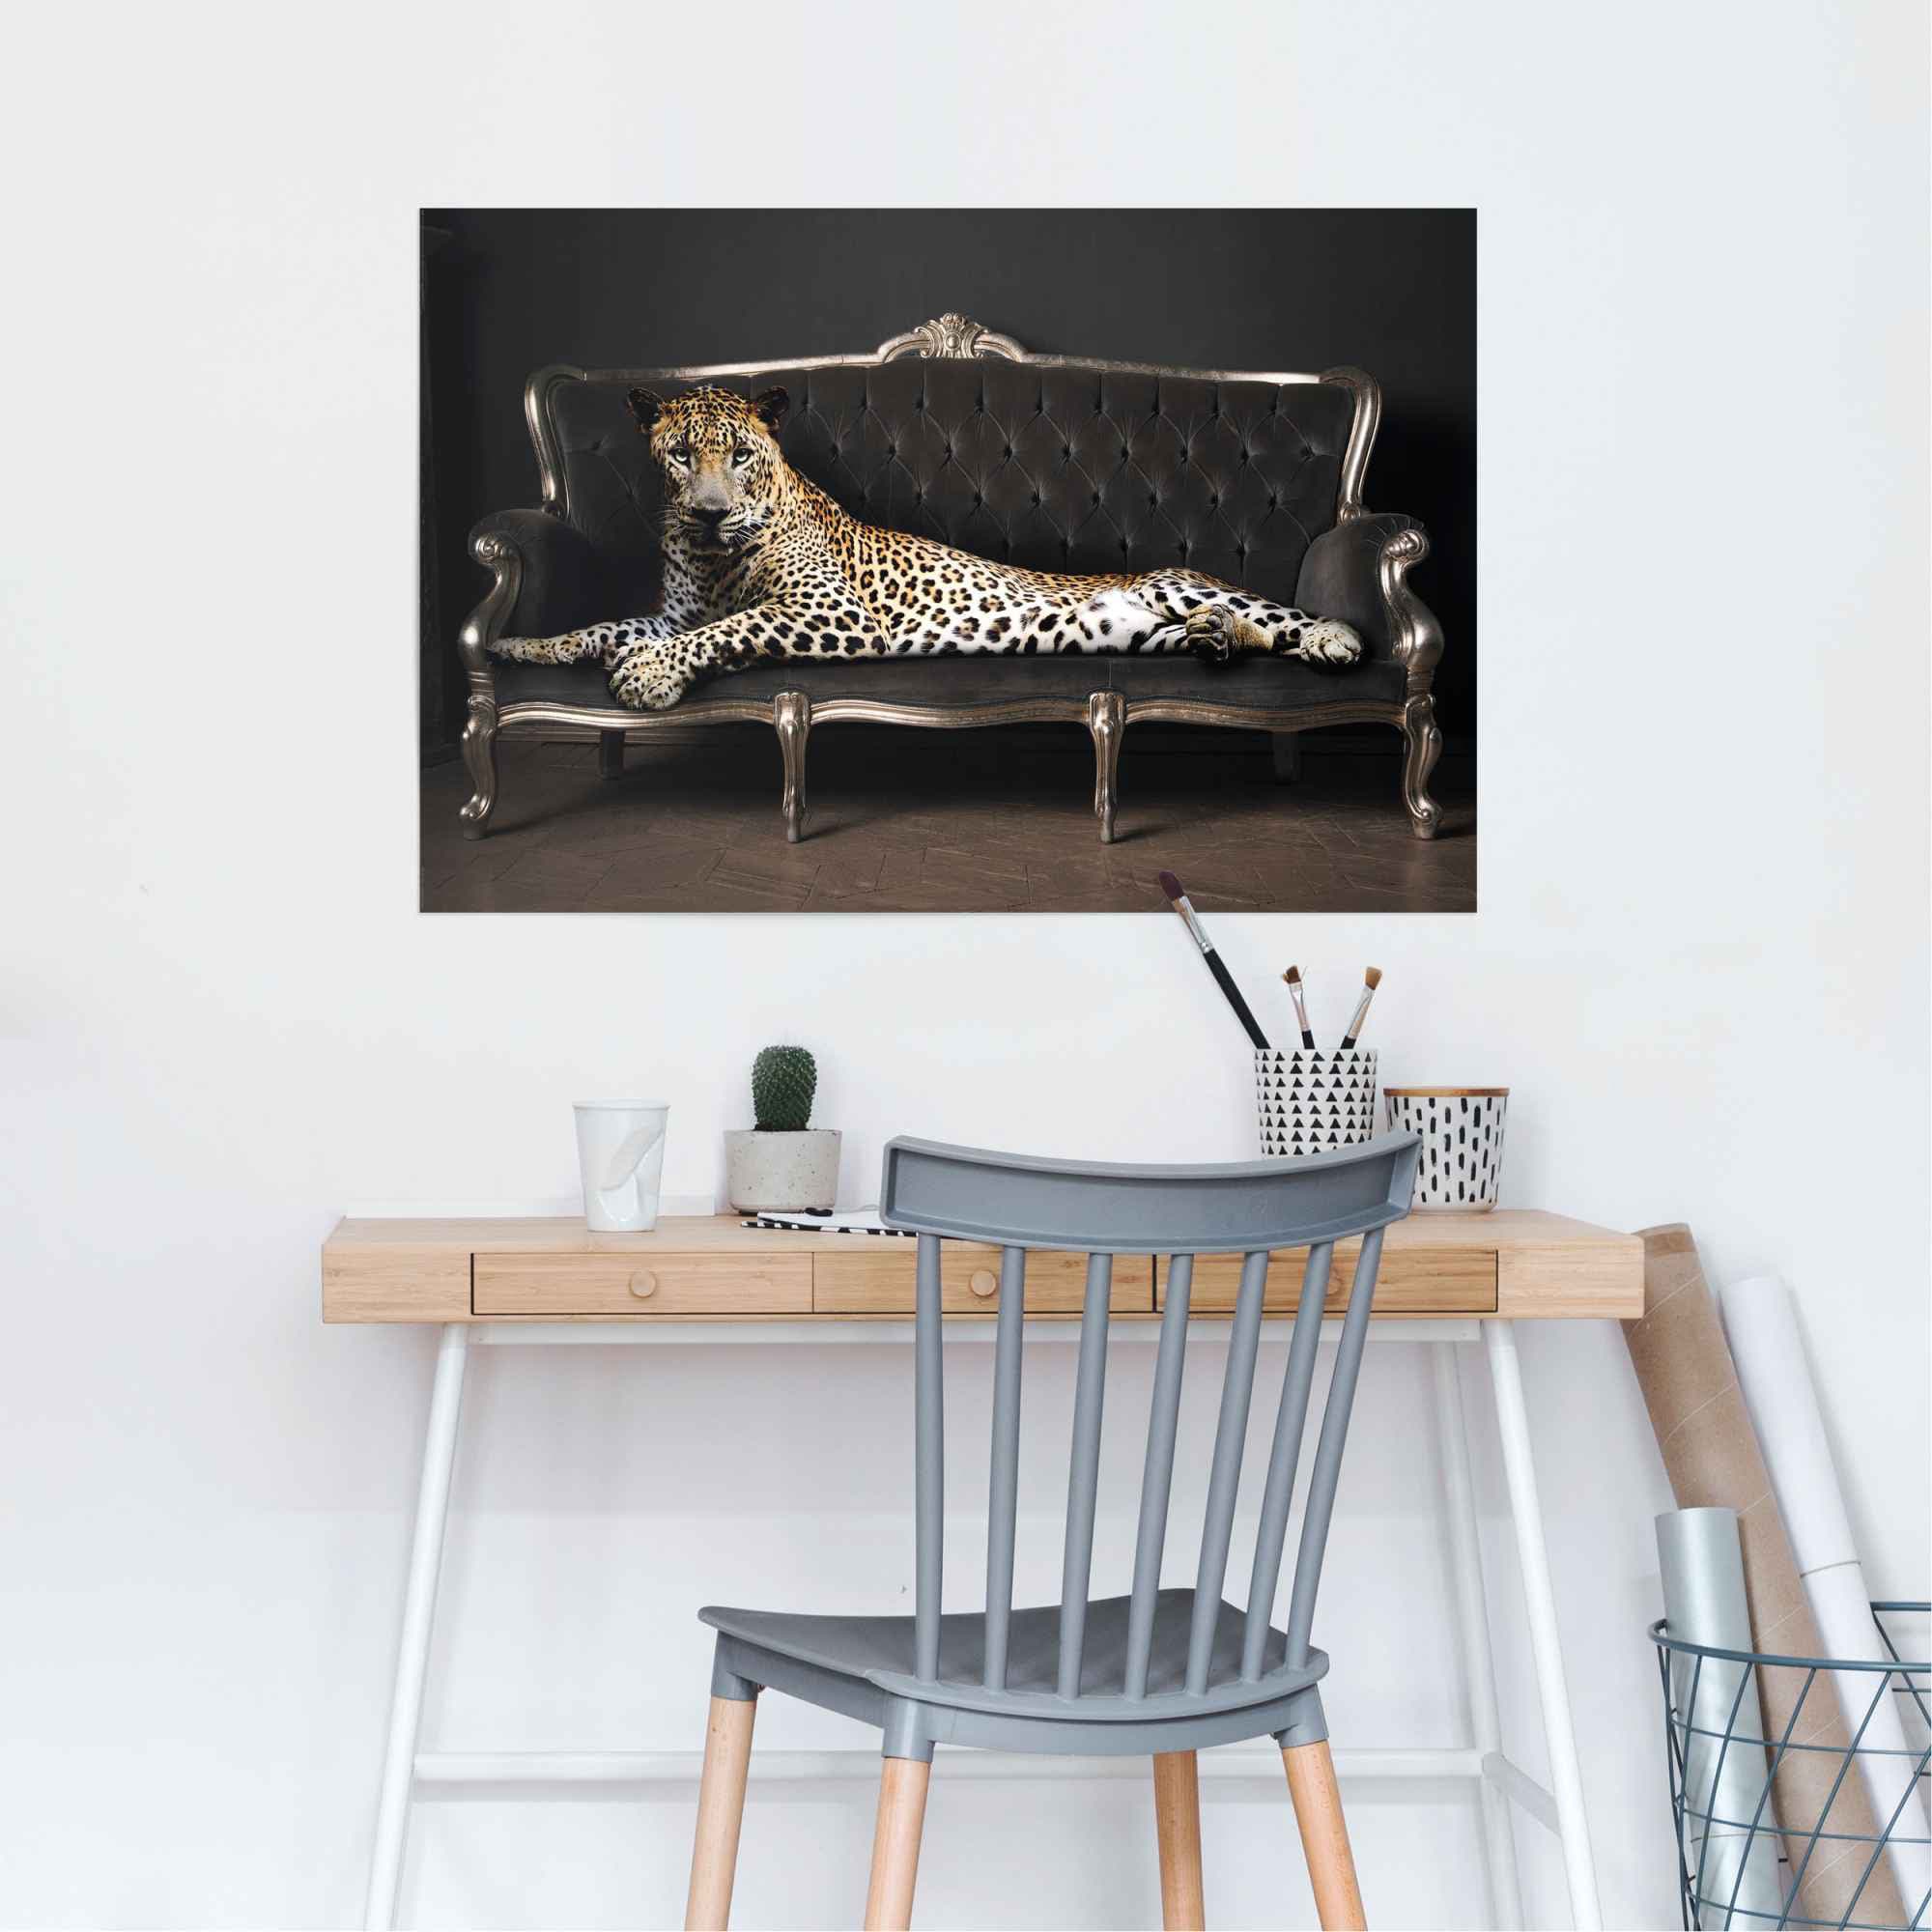 »Leopard (1 Luxus Panther - Reinders! - St.) Relax«, Chic bei Poster - Liegend OTTO